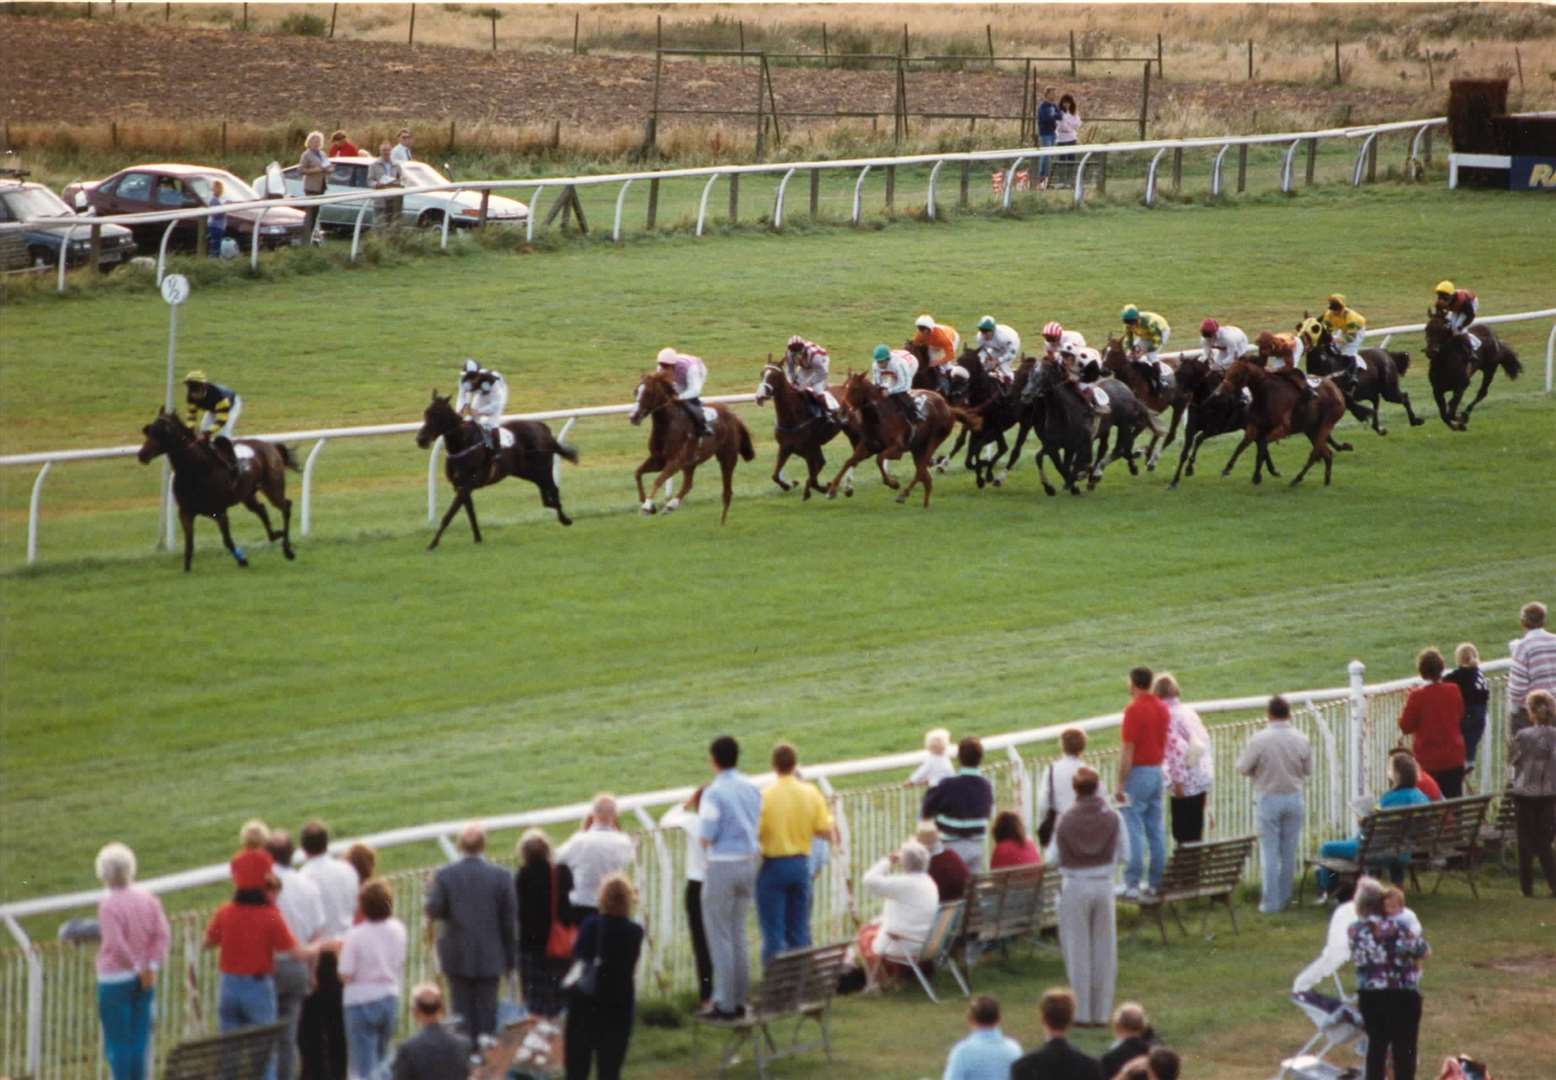 The racecourse in its prime: The KM/Radio Kent race day in 1991